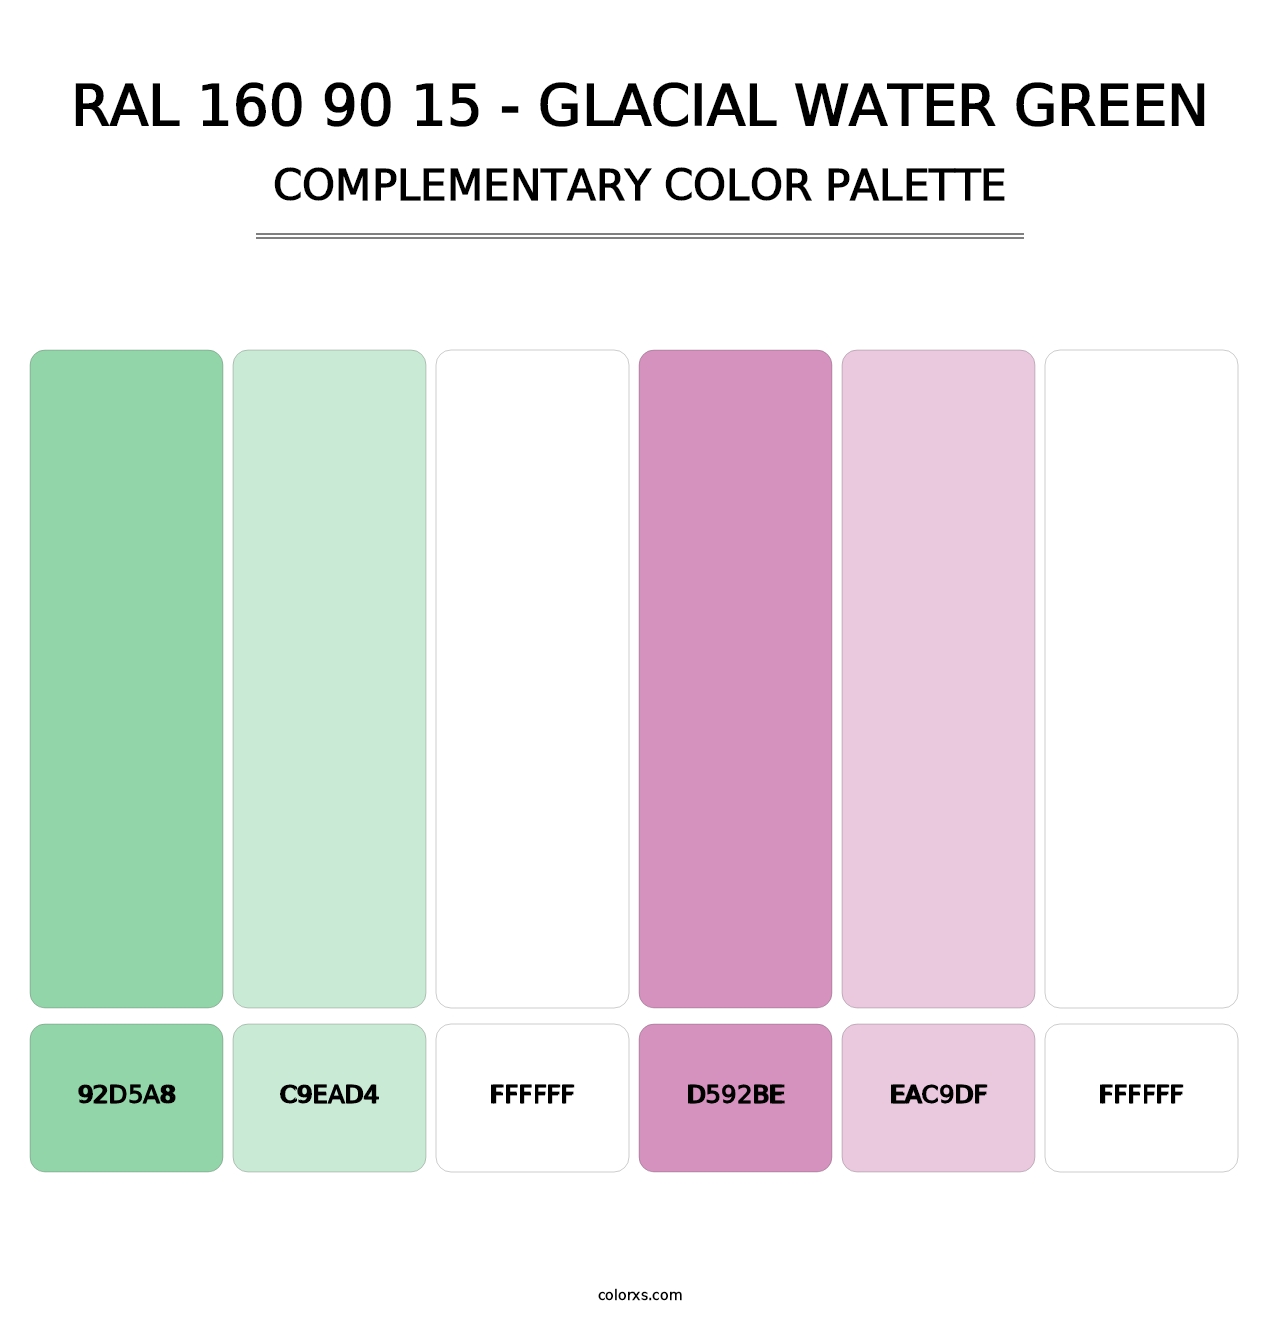 RAL 160 90 15 - Glacial Water Green - Complementary Color Palette